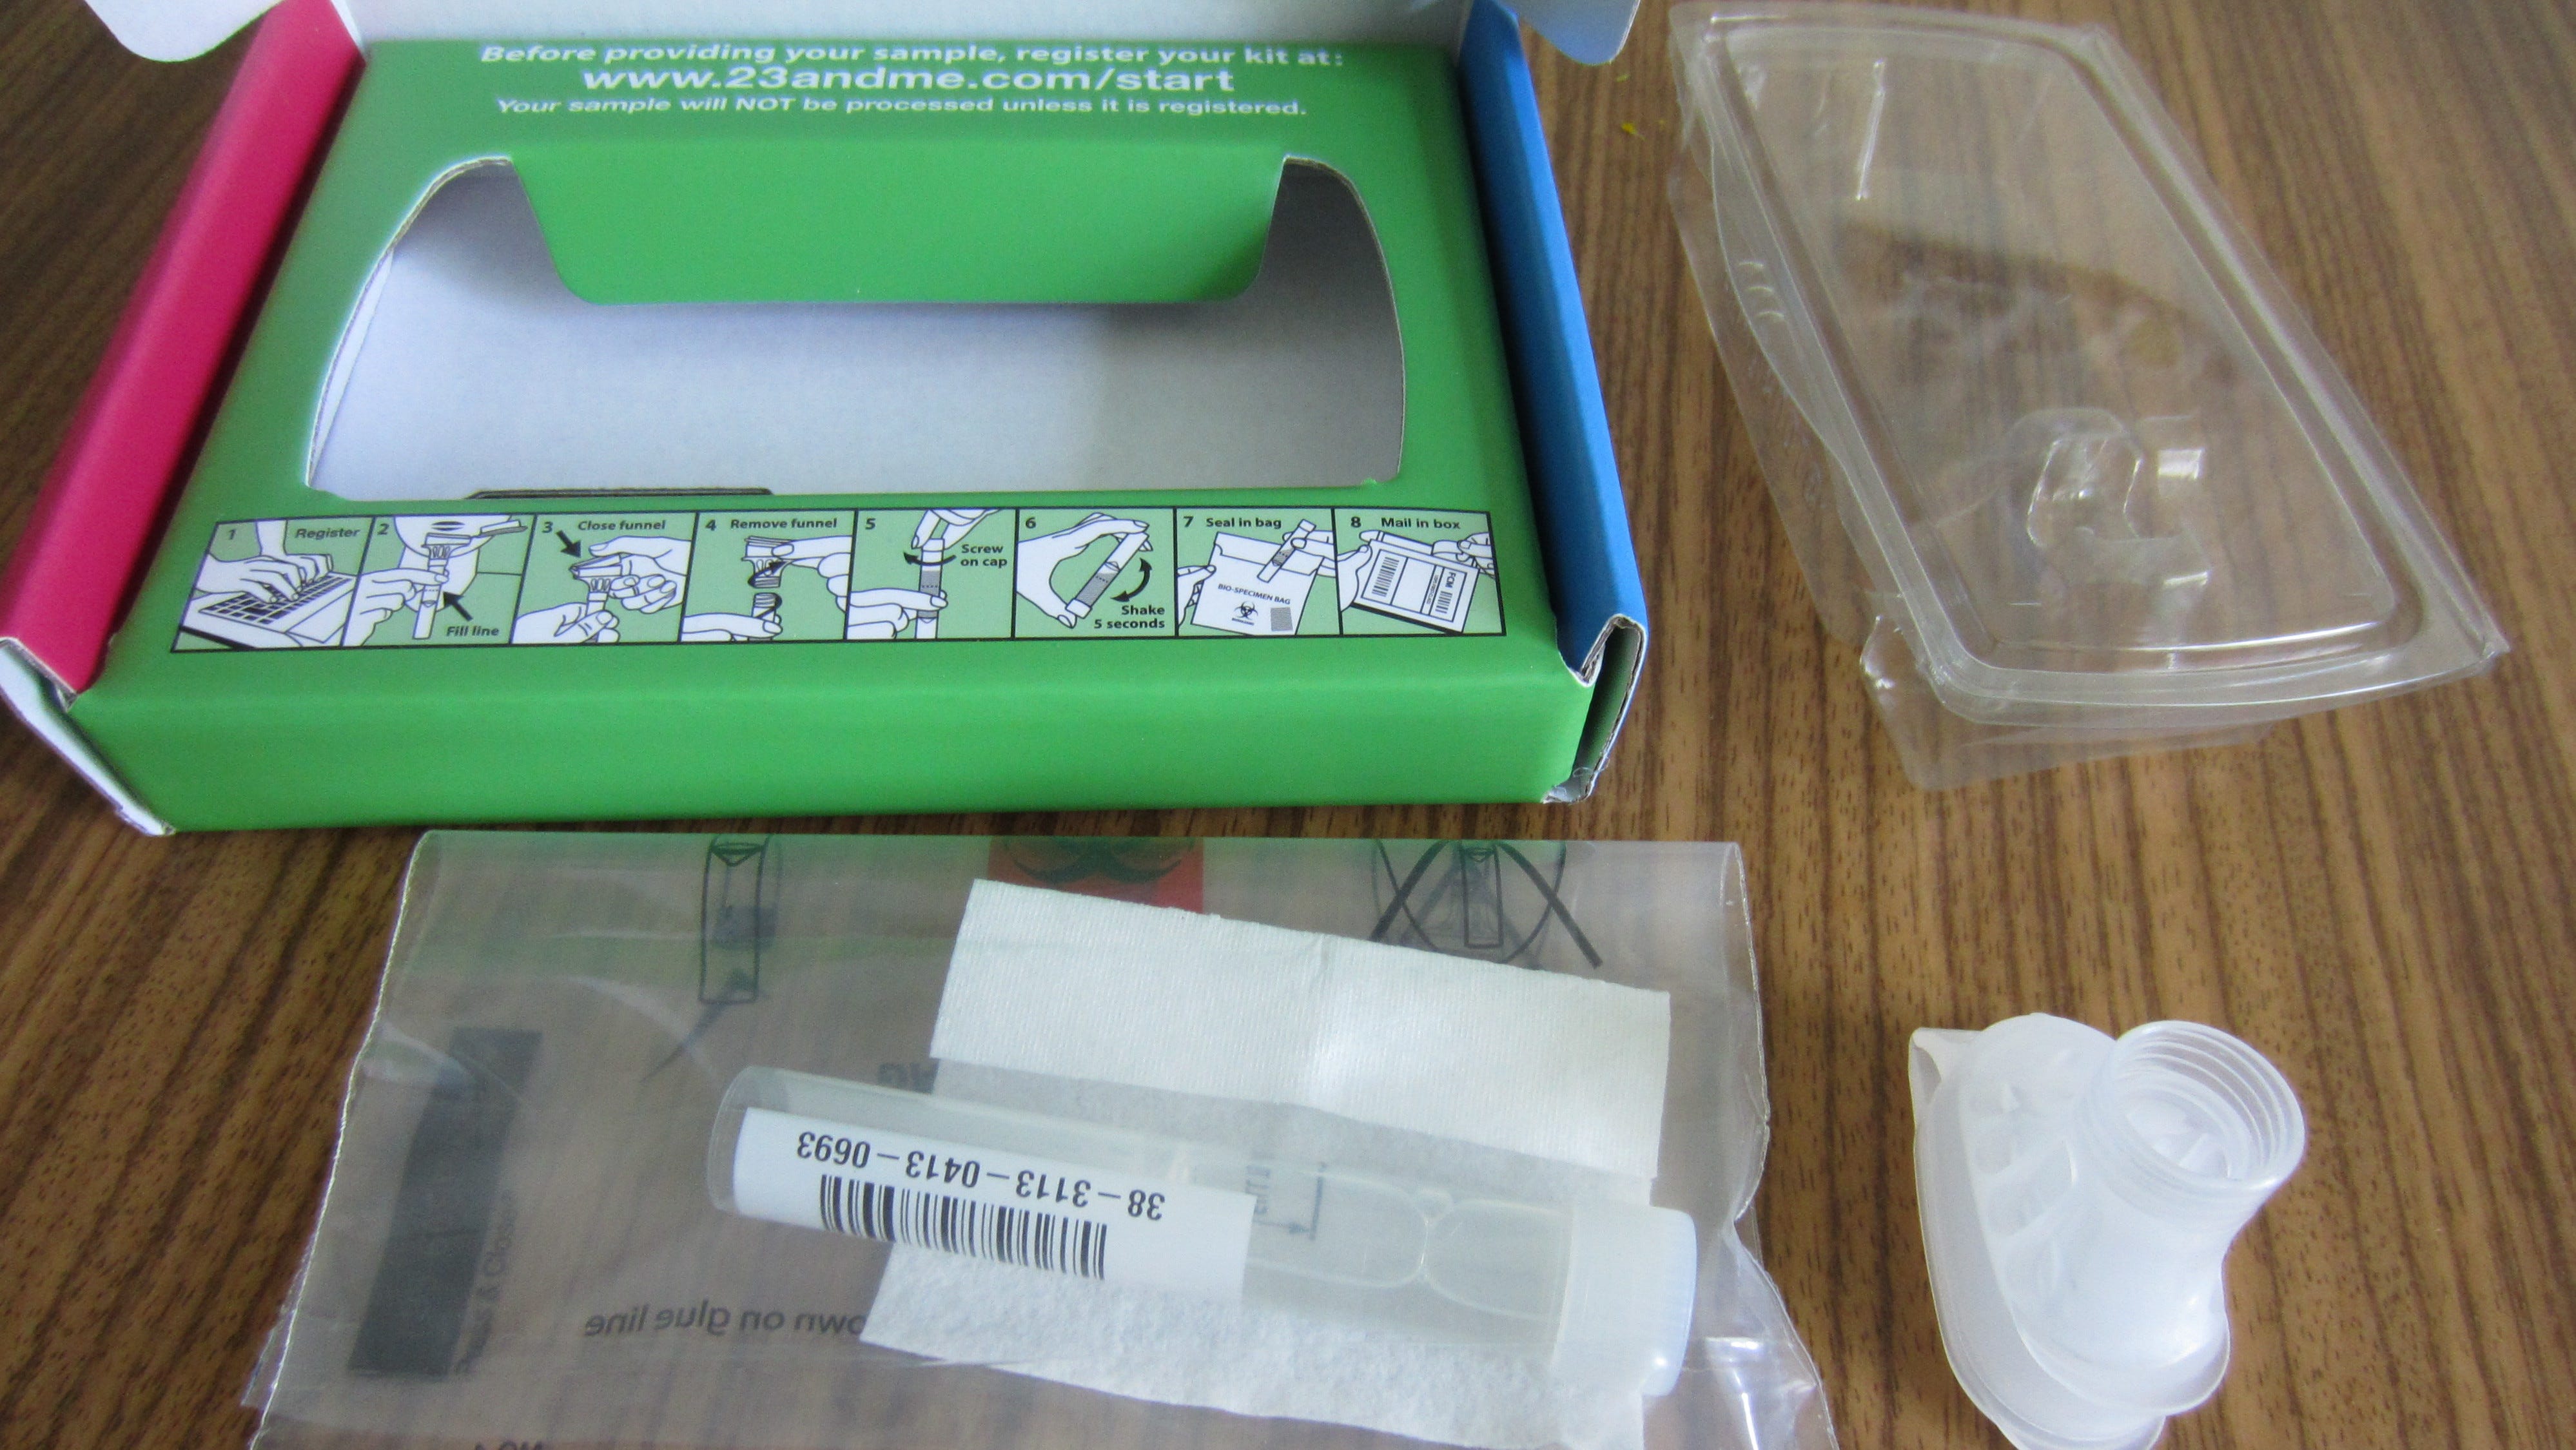 A 23andMe genetic testing kit. Photo: Hanno Böck (Wikimedia Commons)